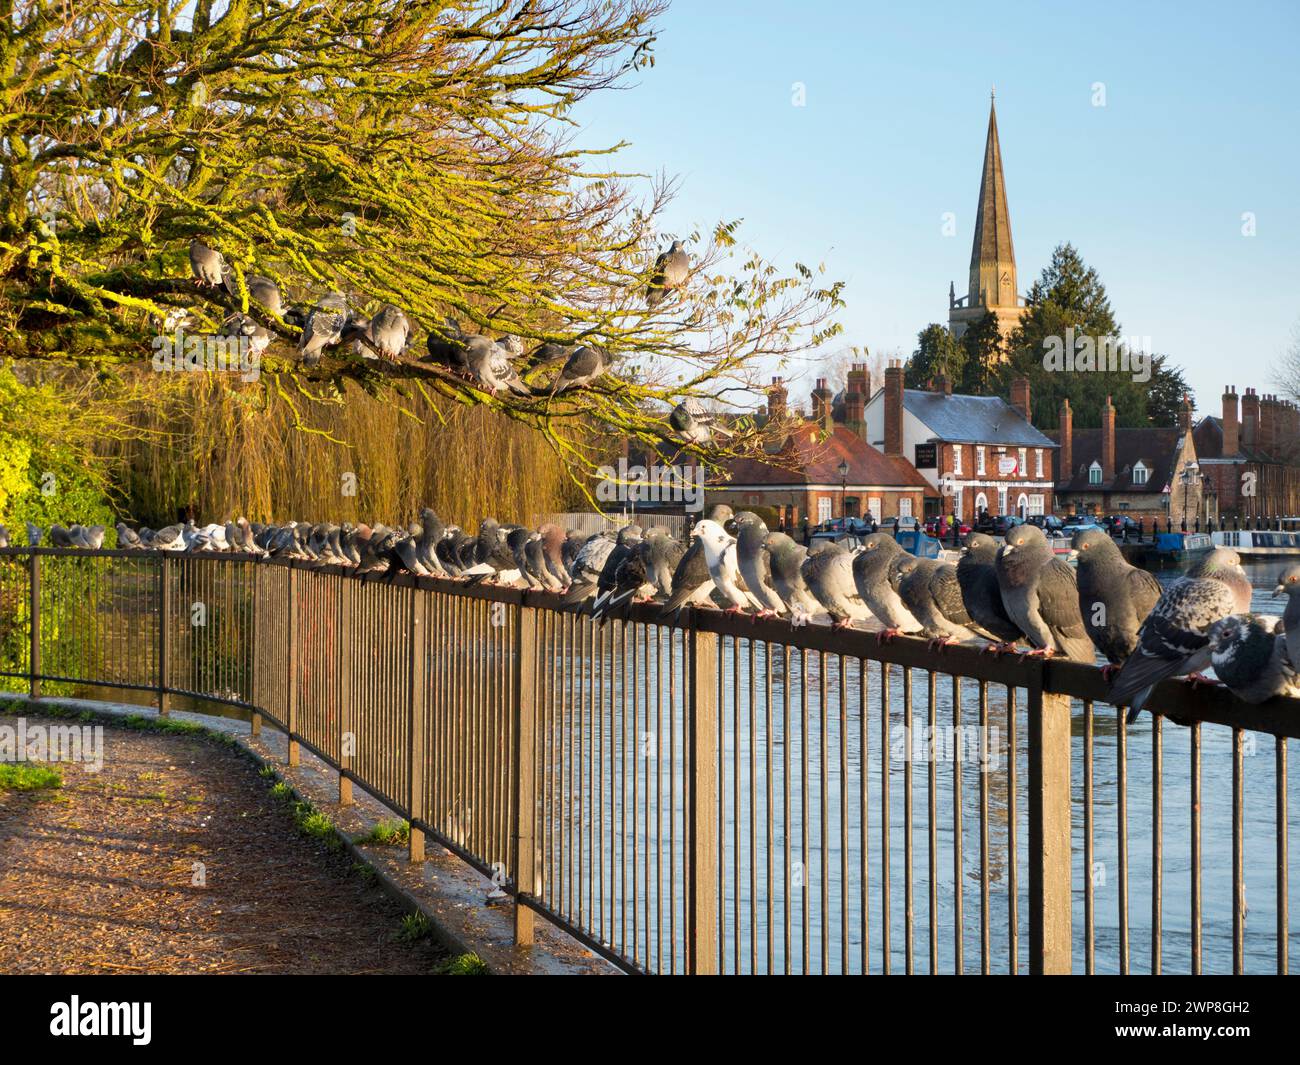 Saint Helen's Wharf is a noted beauty spot on the River Thames, just upstream of the medieval bridge at Abingdon-on-Thames. The wharf was for centurie Stock Photo